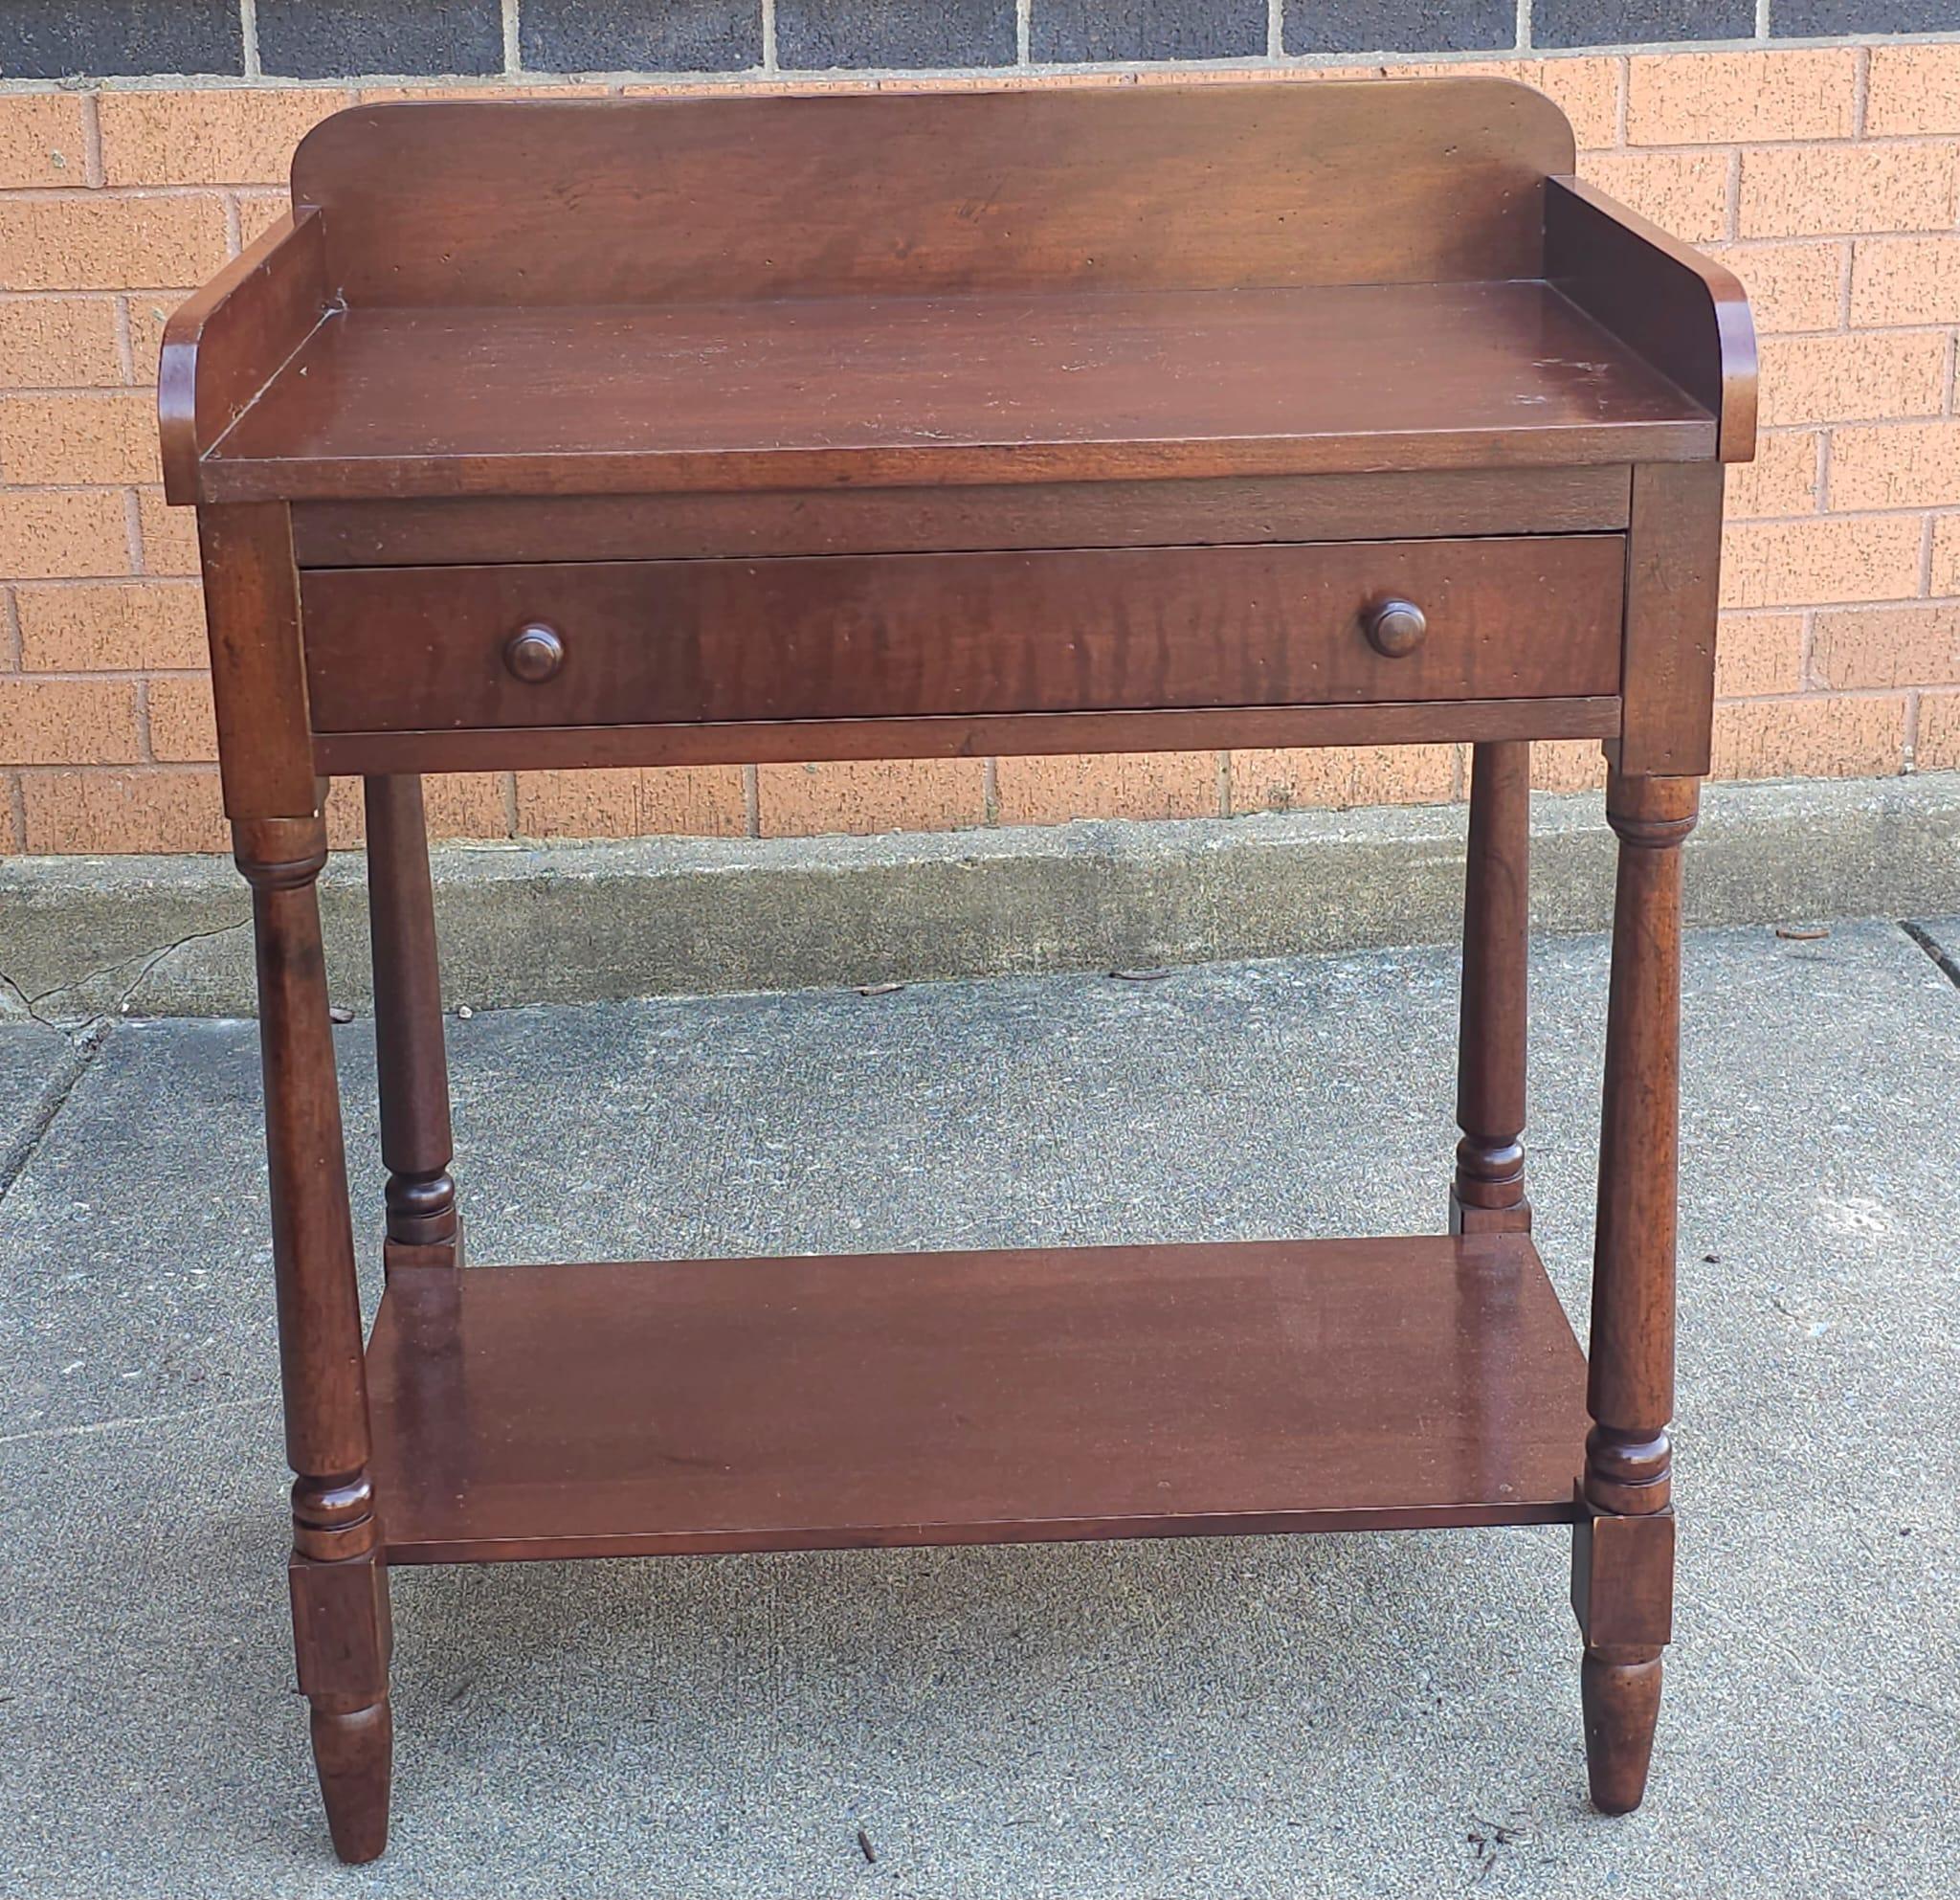 An early 20th Century Victorian Style Mahogany Work Table or Sewing Table in great antique condition. 
Measures 27